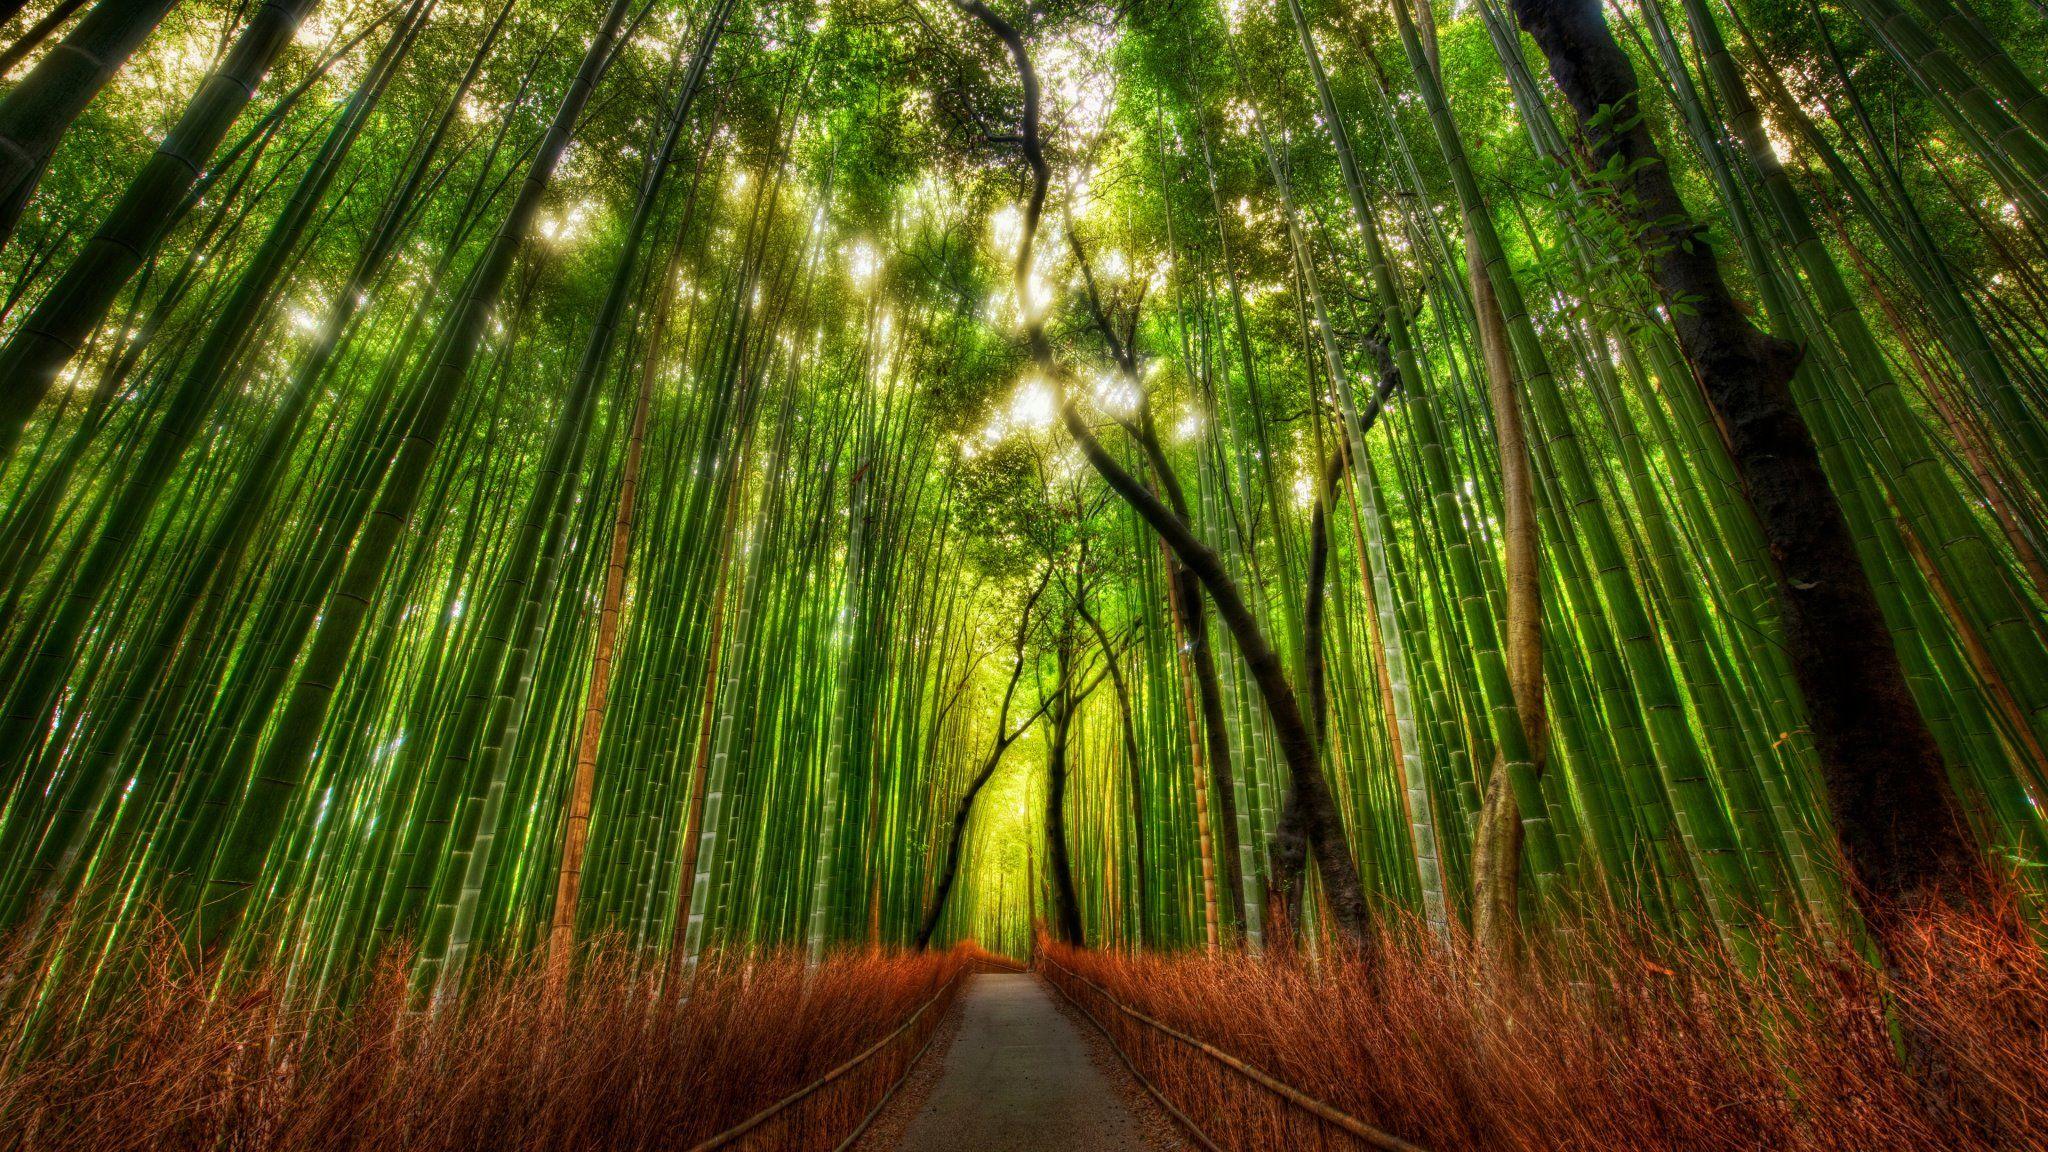 Bamboo Forest Kyoto Japan. Bamboo. Bamboo forest japan, HDR